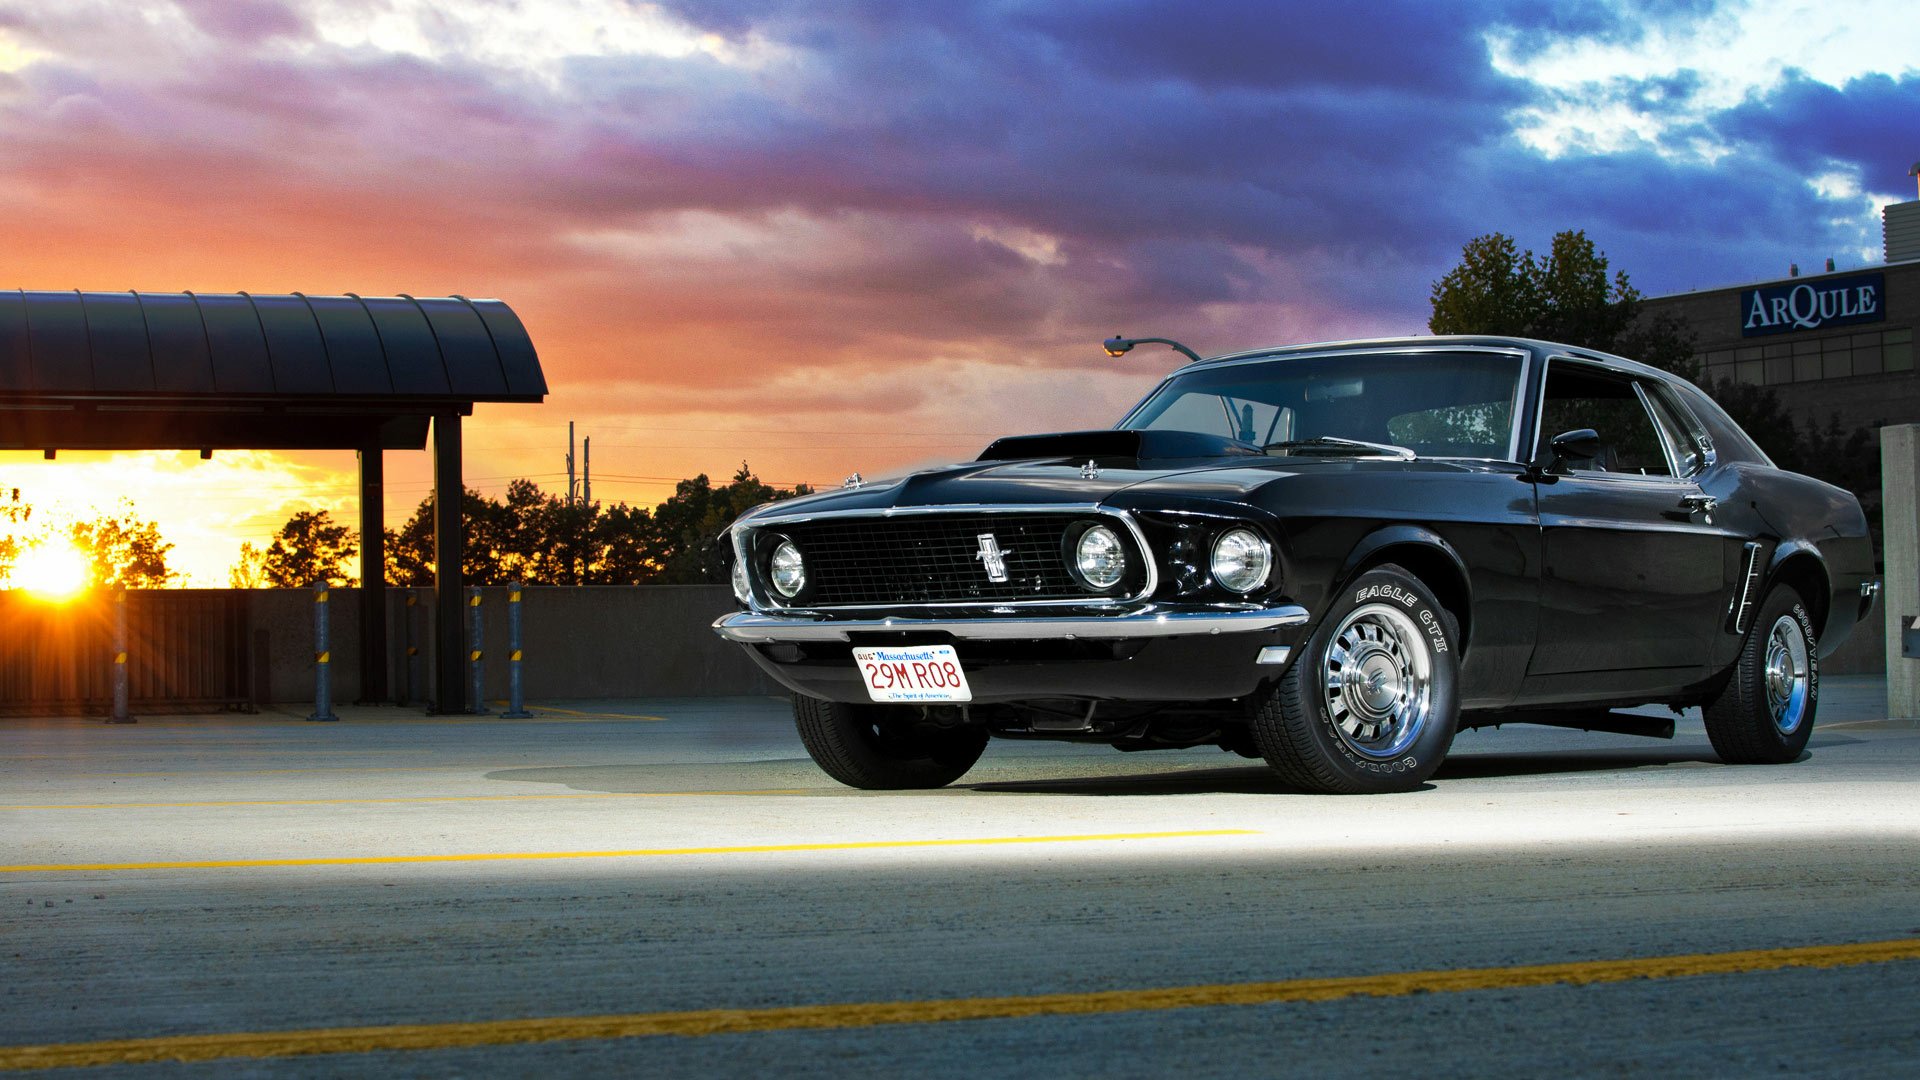 Ford Mustang Mach 1 Hd Wallpaper Background Image 1920x1080